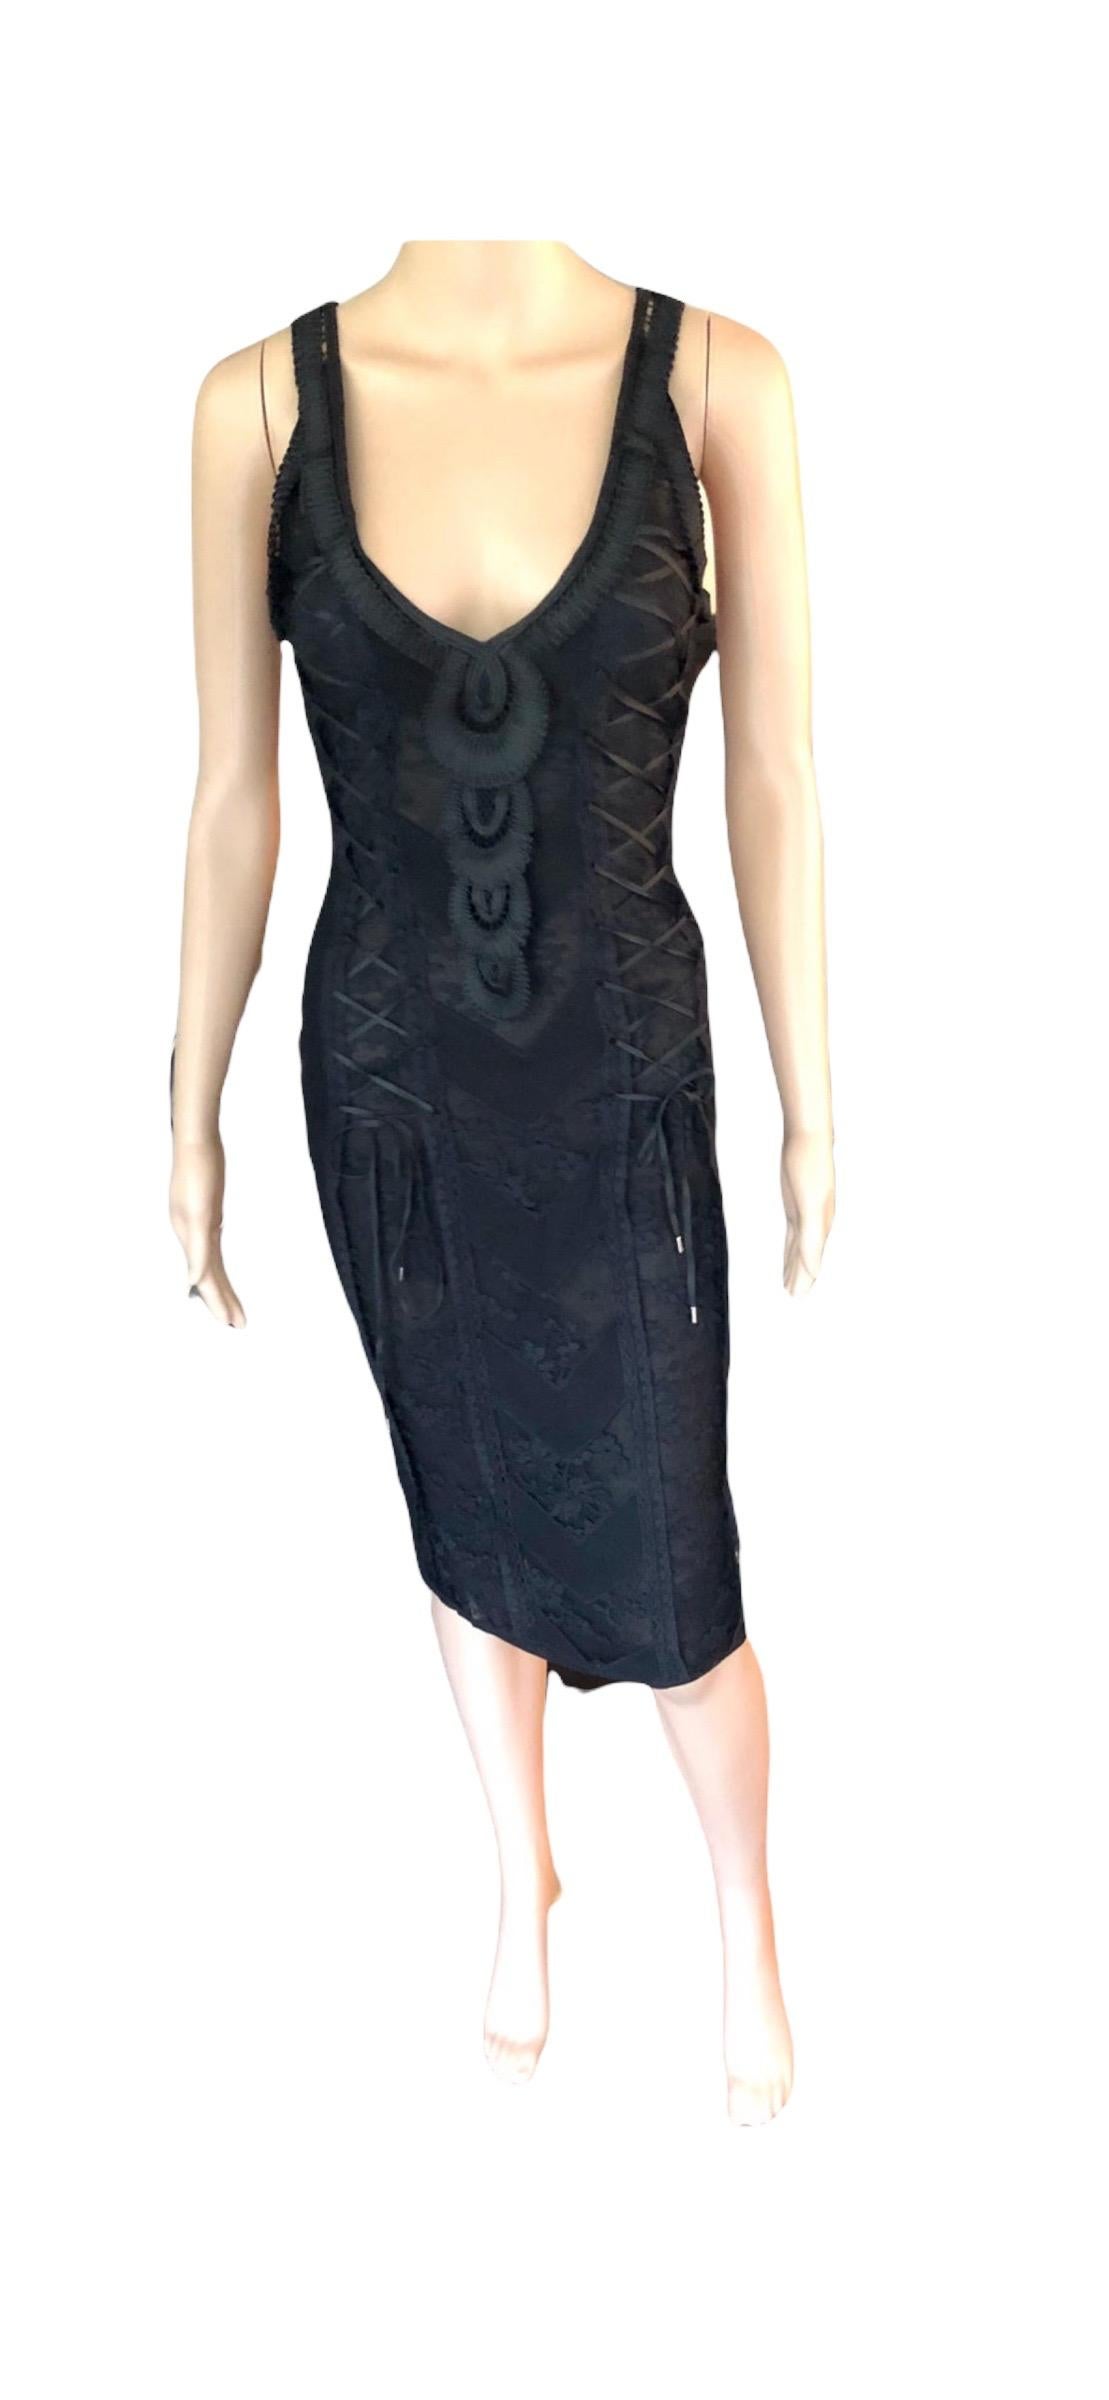 Christian Dior by John Galliano S/S 2006 Sheer Lace Trimmed Corset Knit Dress For Sale 6